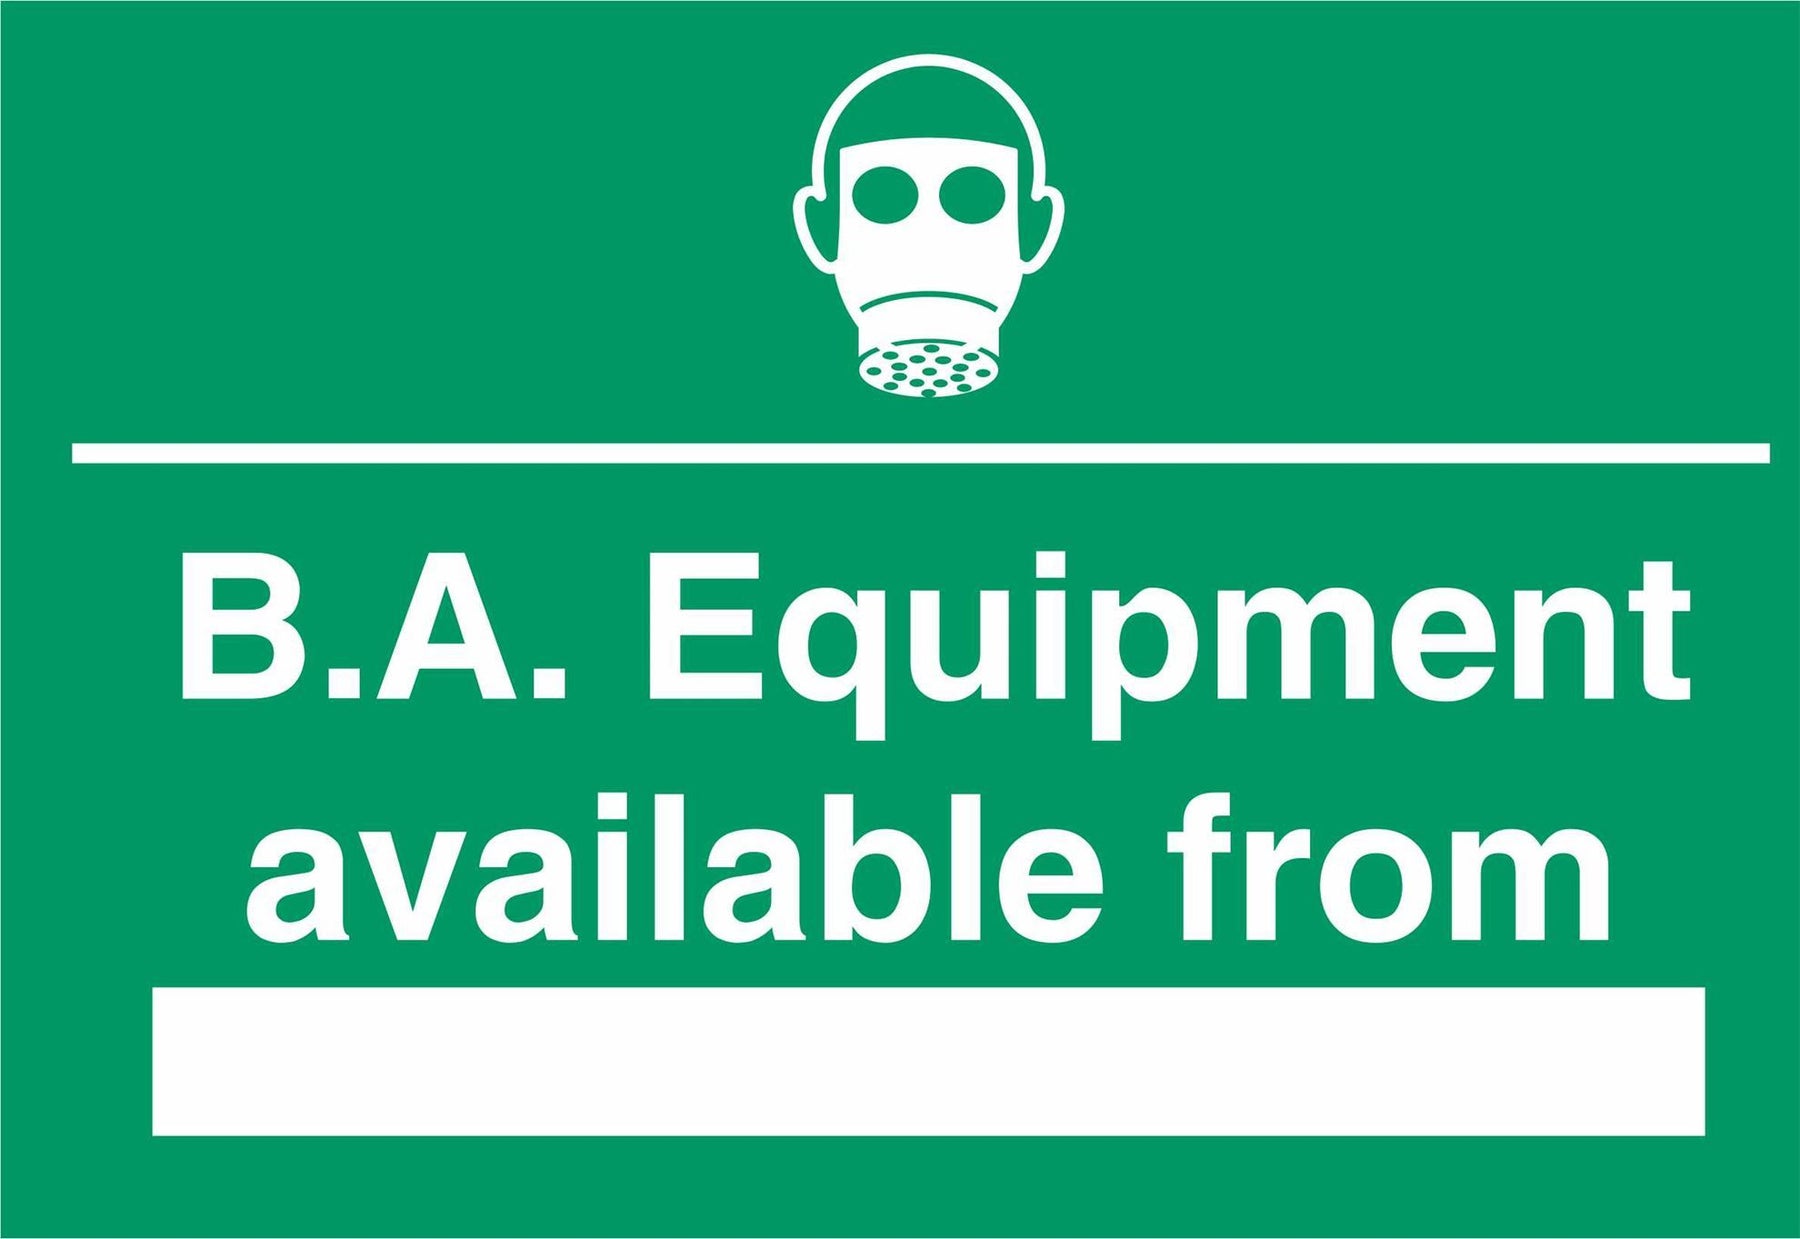 B.A. Equipment available from